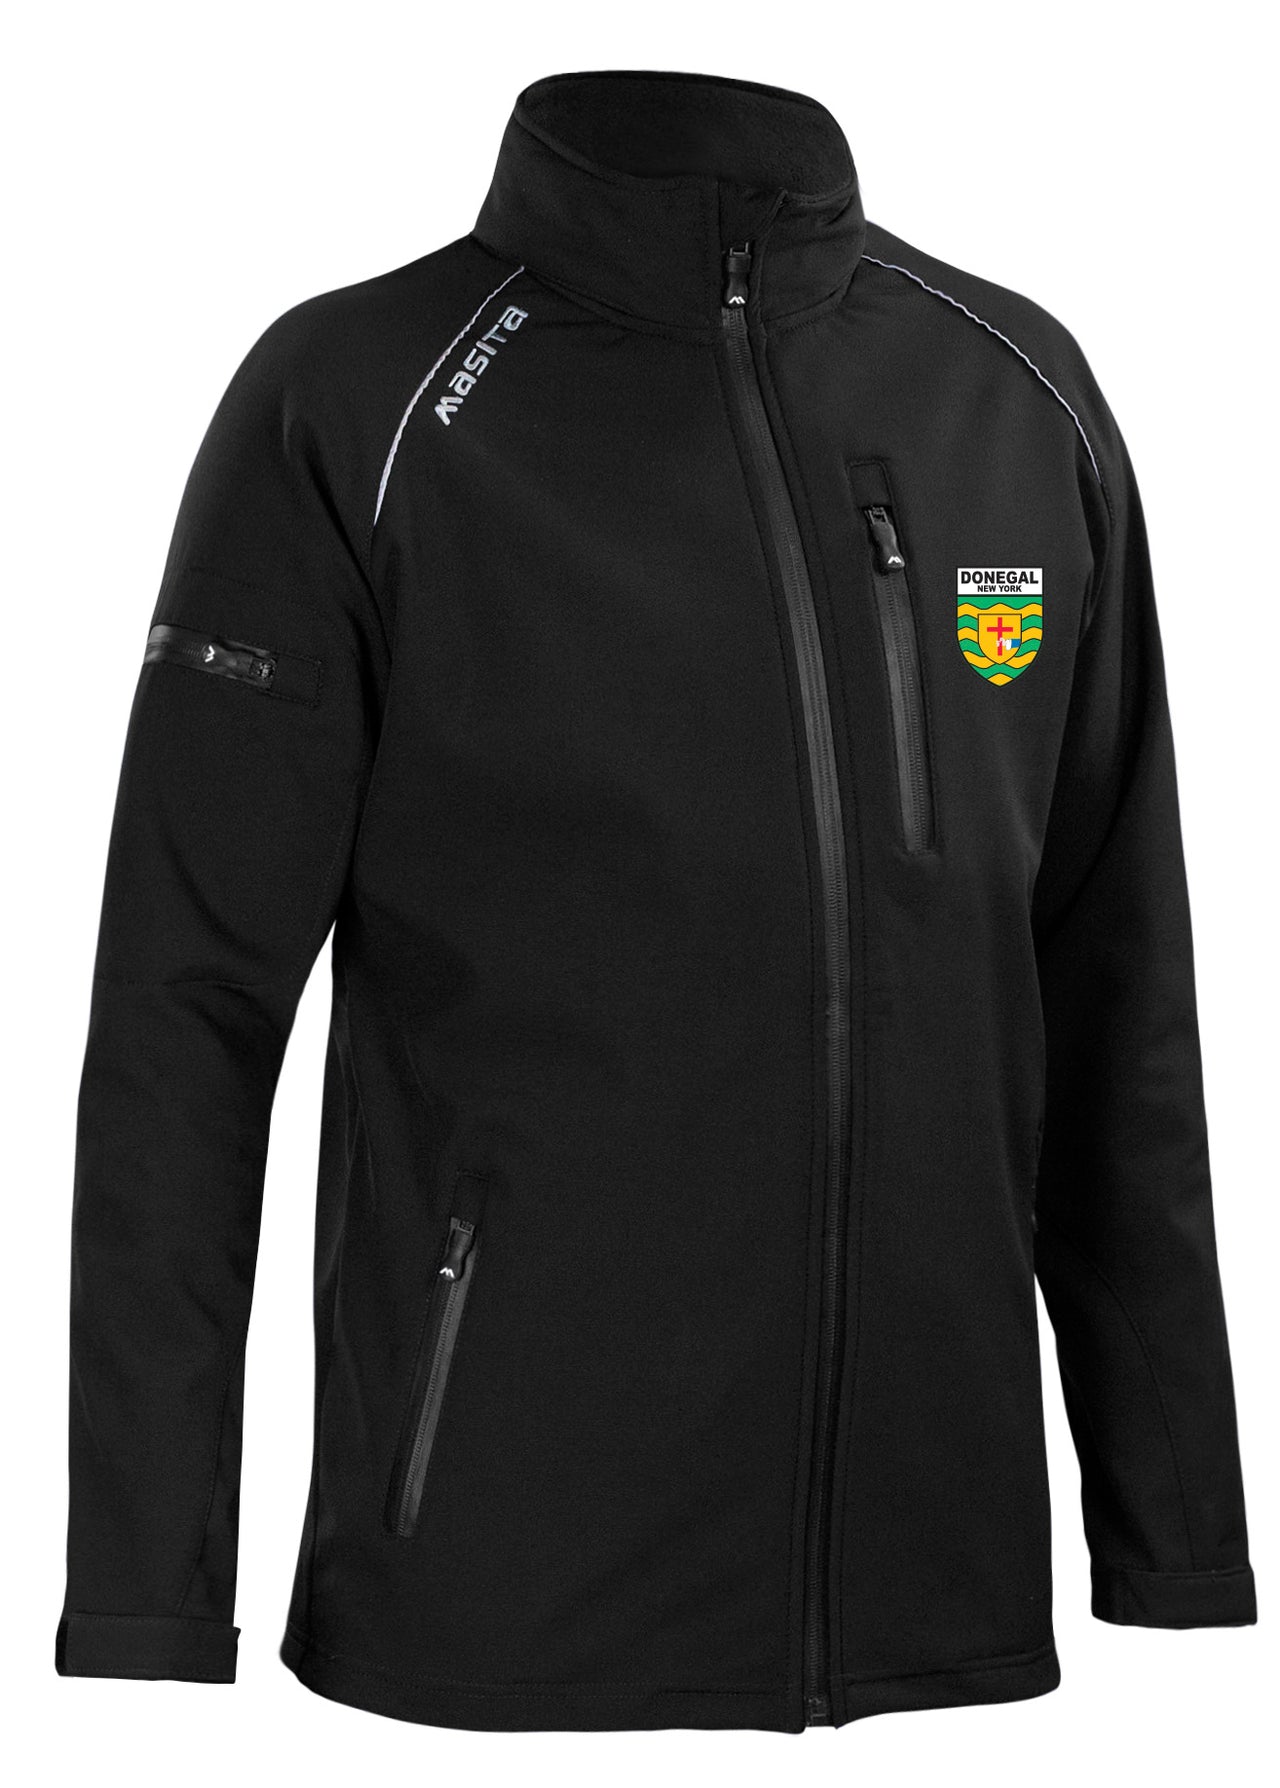 Donegal New York Softshell Jacket